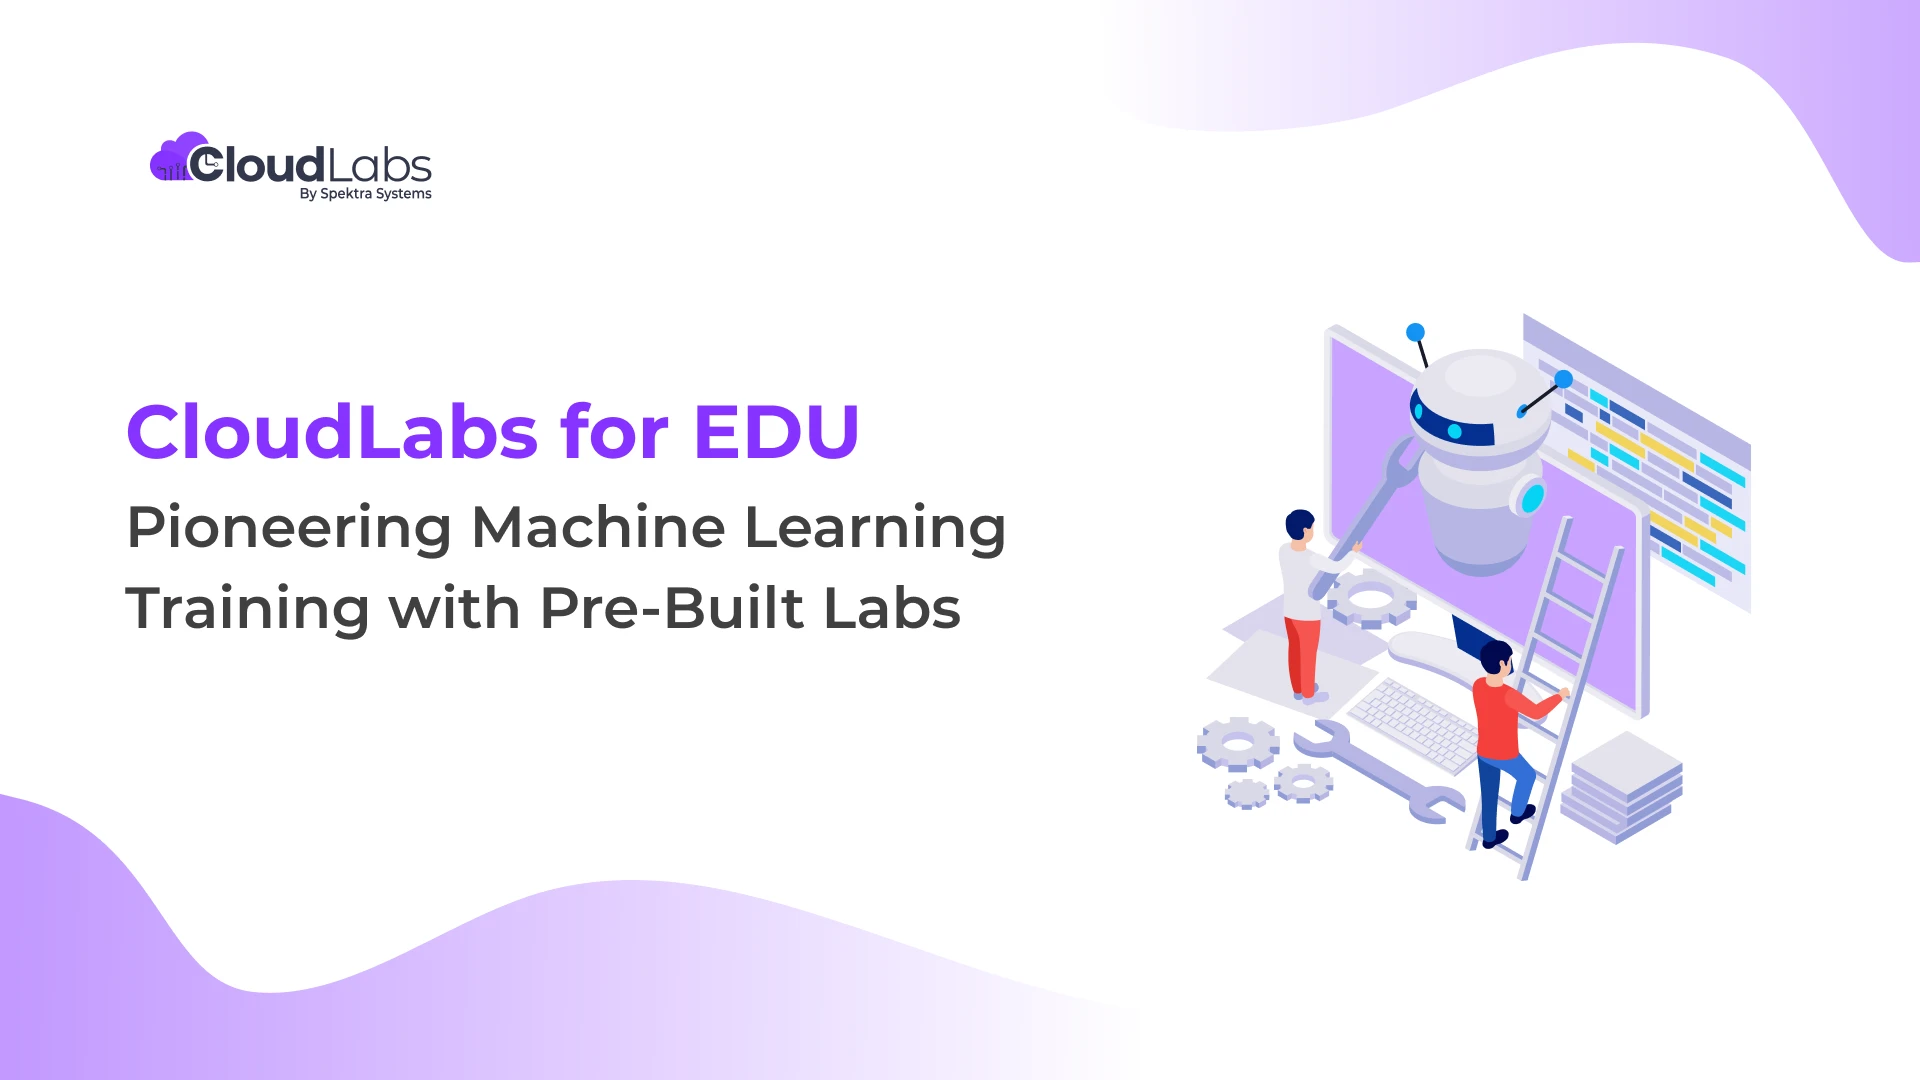 CloudLabs for EDU – Pioneering Machine Learning Training with Pre-Built Labs